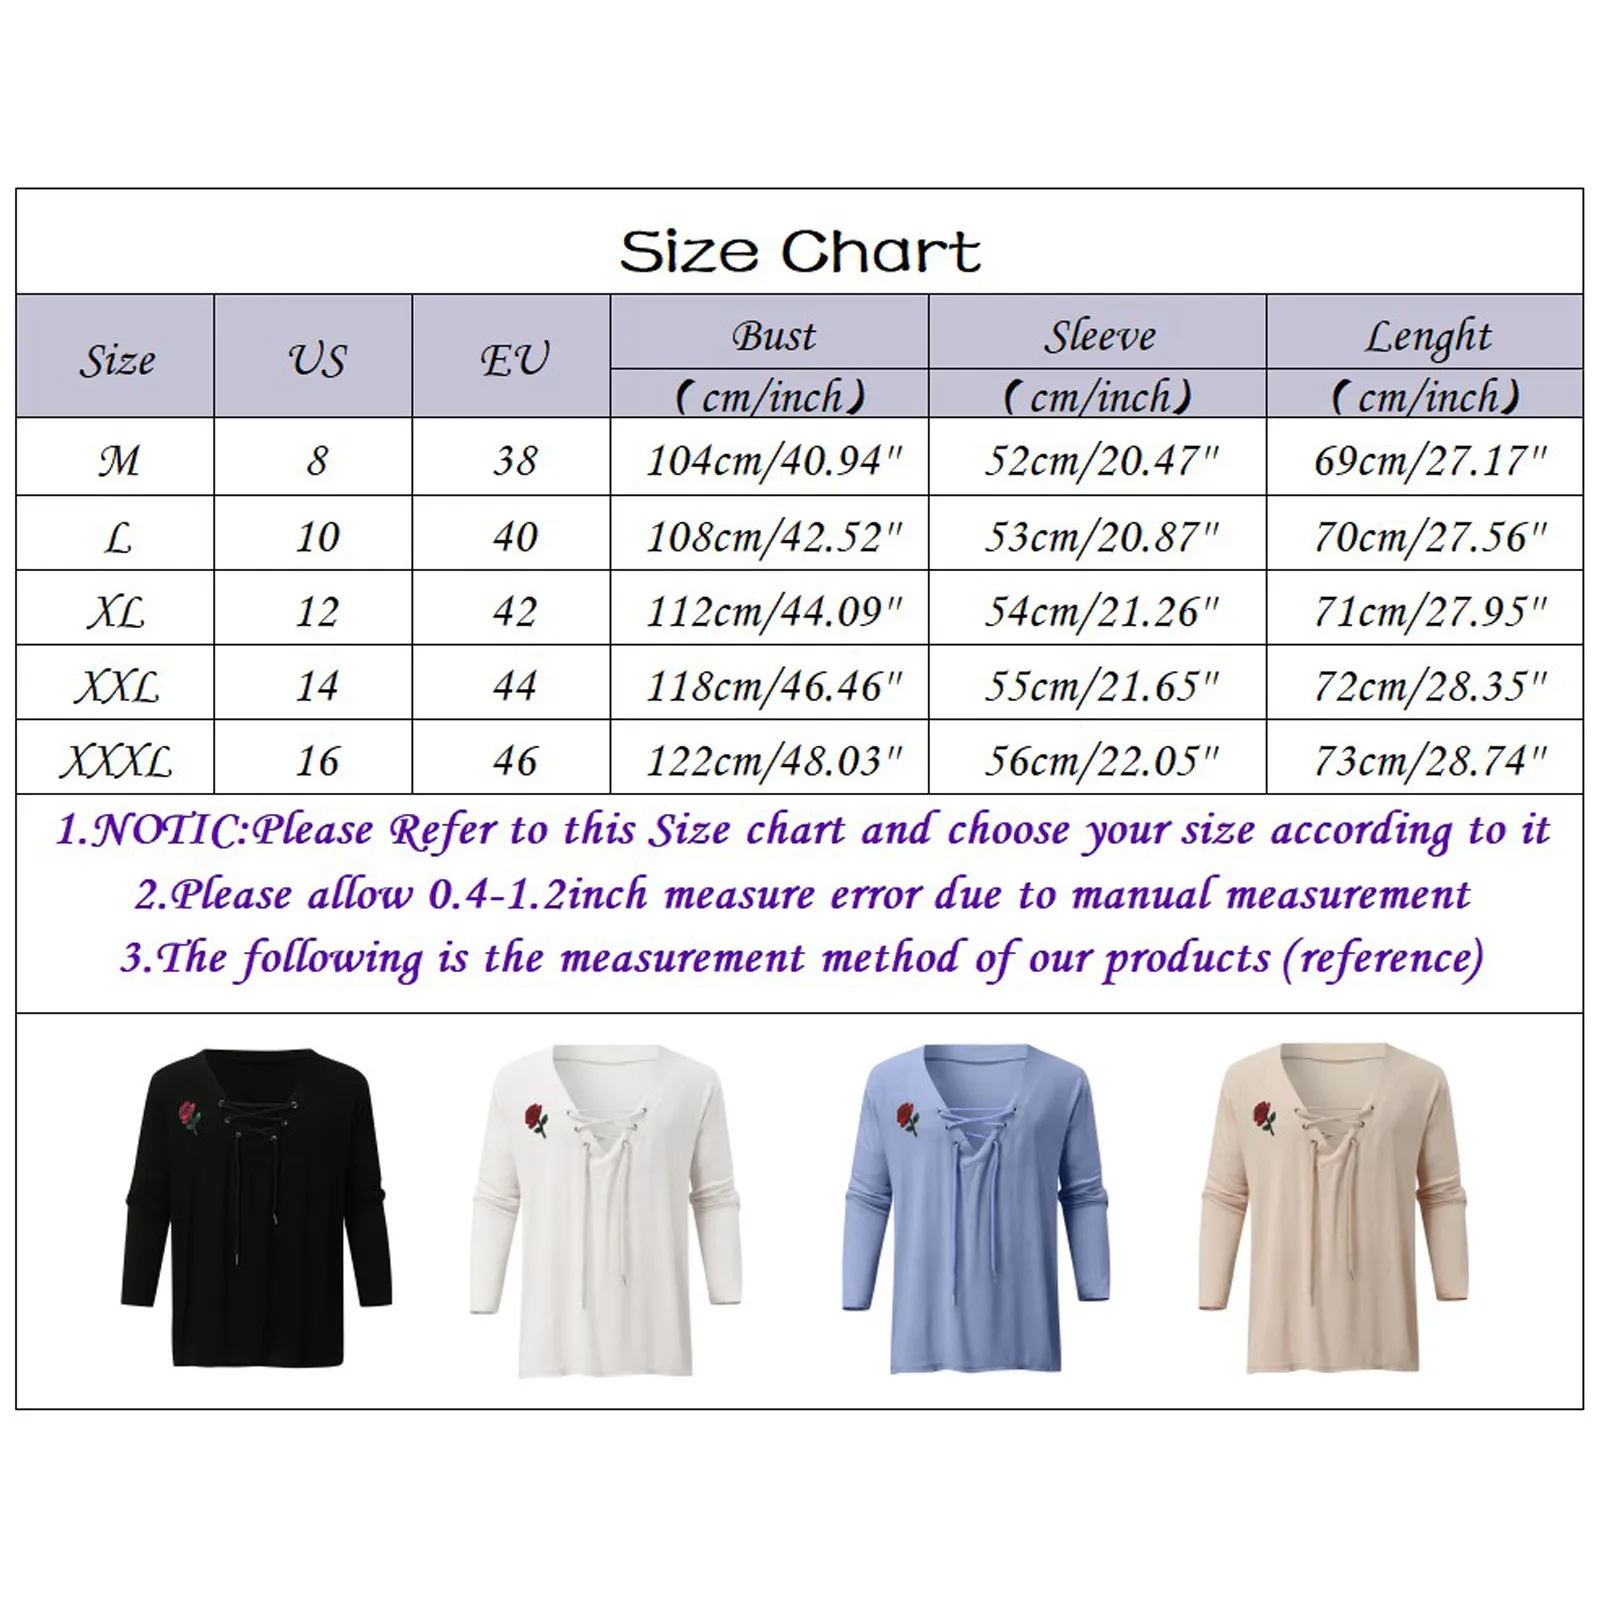 

2021 Summer Cotton And Linen Shirt Men Fashion Solid Color Tops Shirts Men's Casual Blusa Stretwears Blouse Camisa Masculina